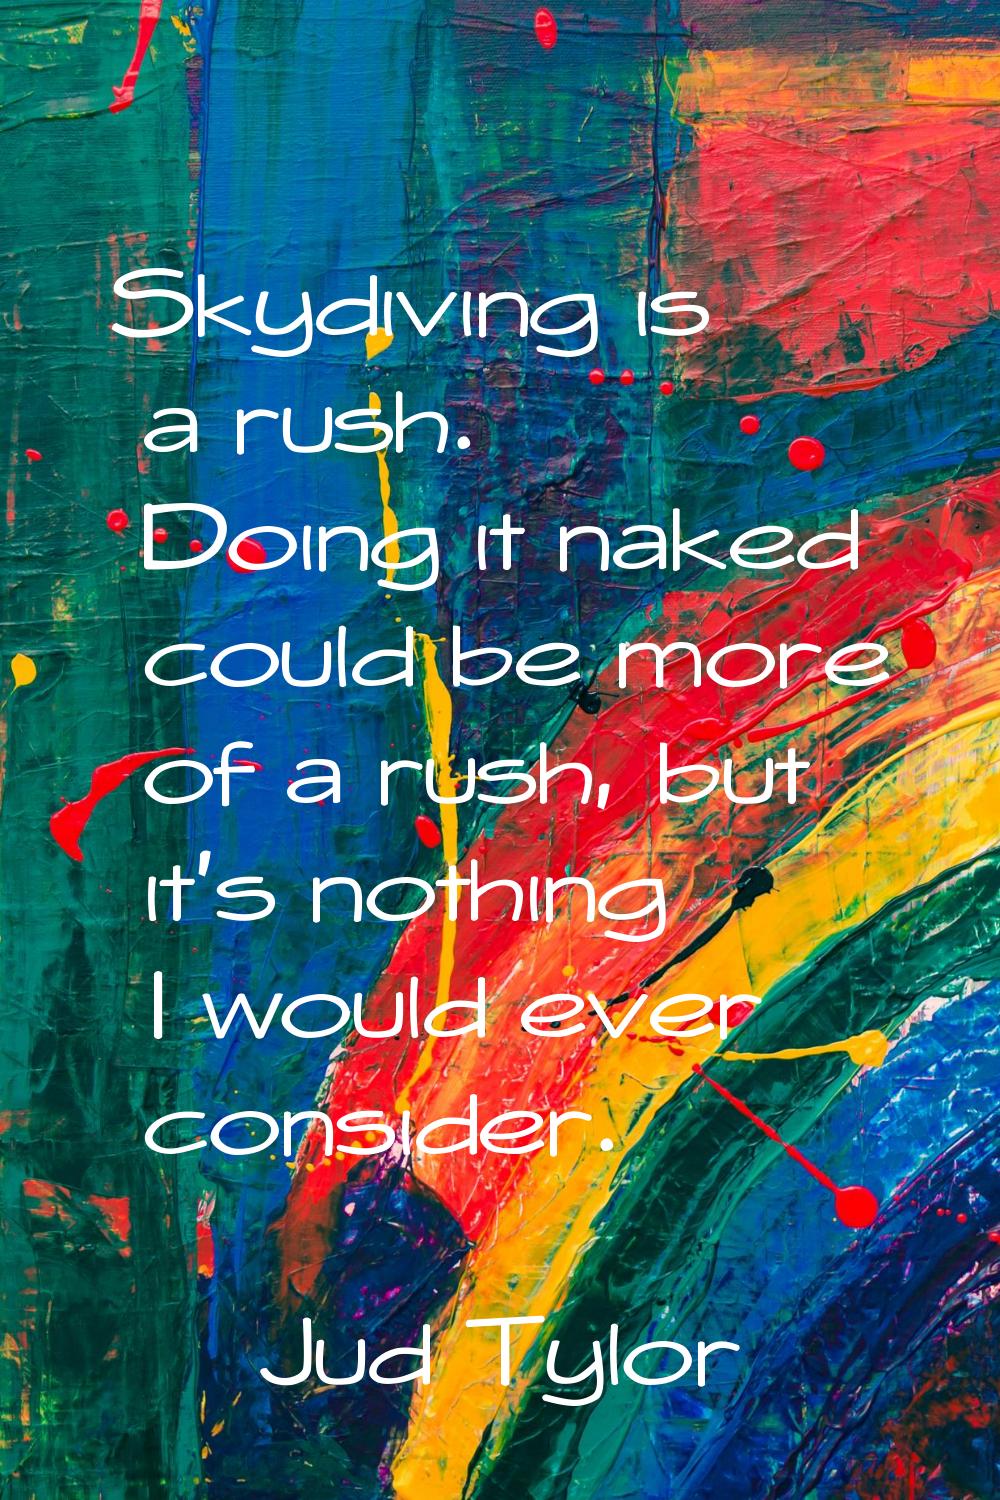 Skydiving is a rush. Doing it naked could be more of a rush, but it's nothing I would ever consider